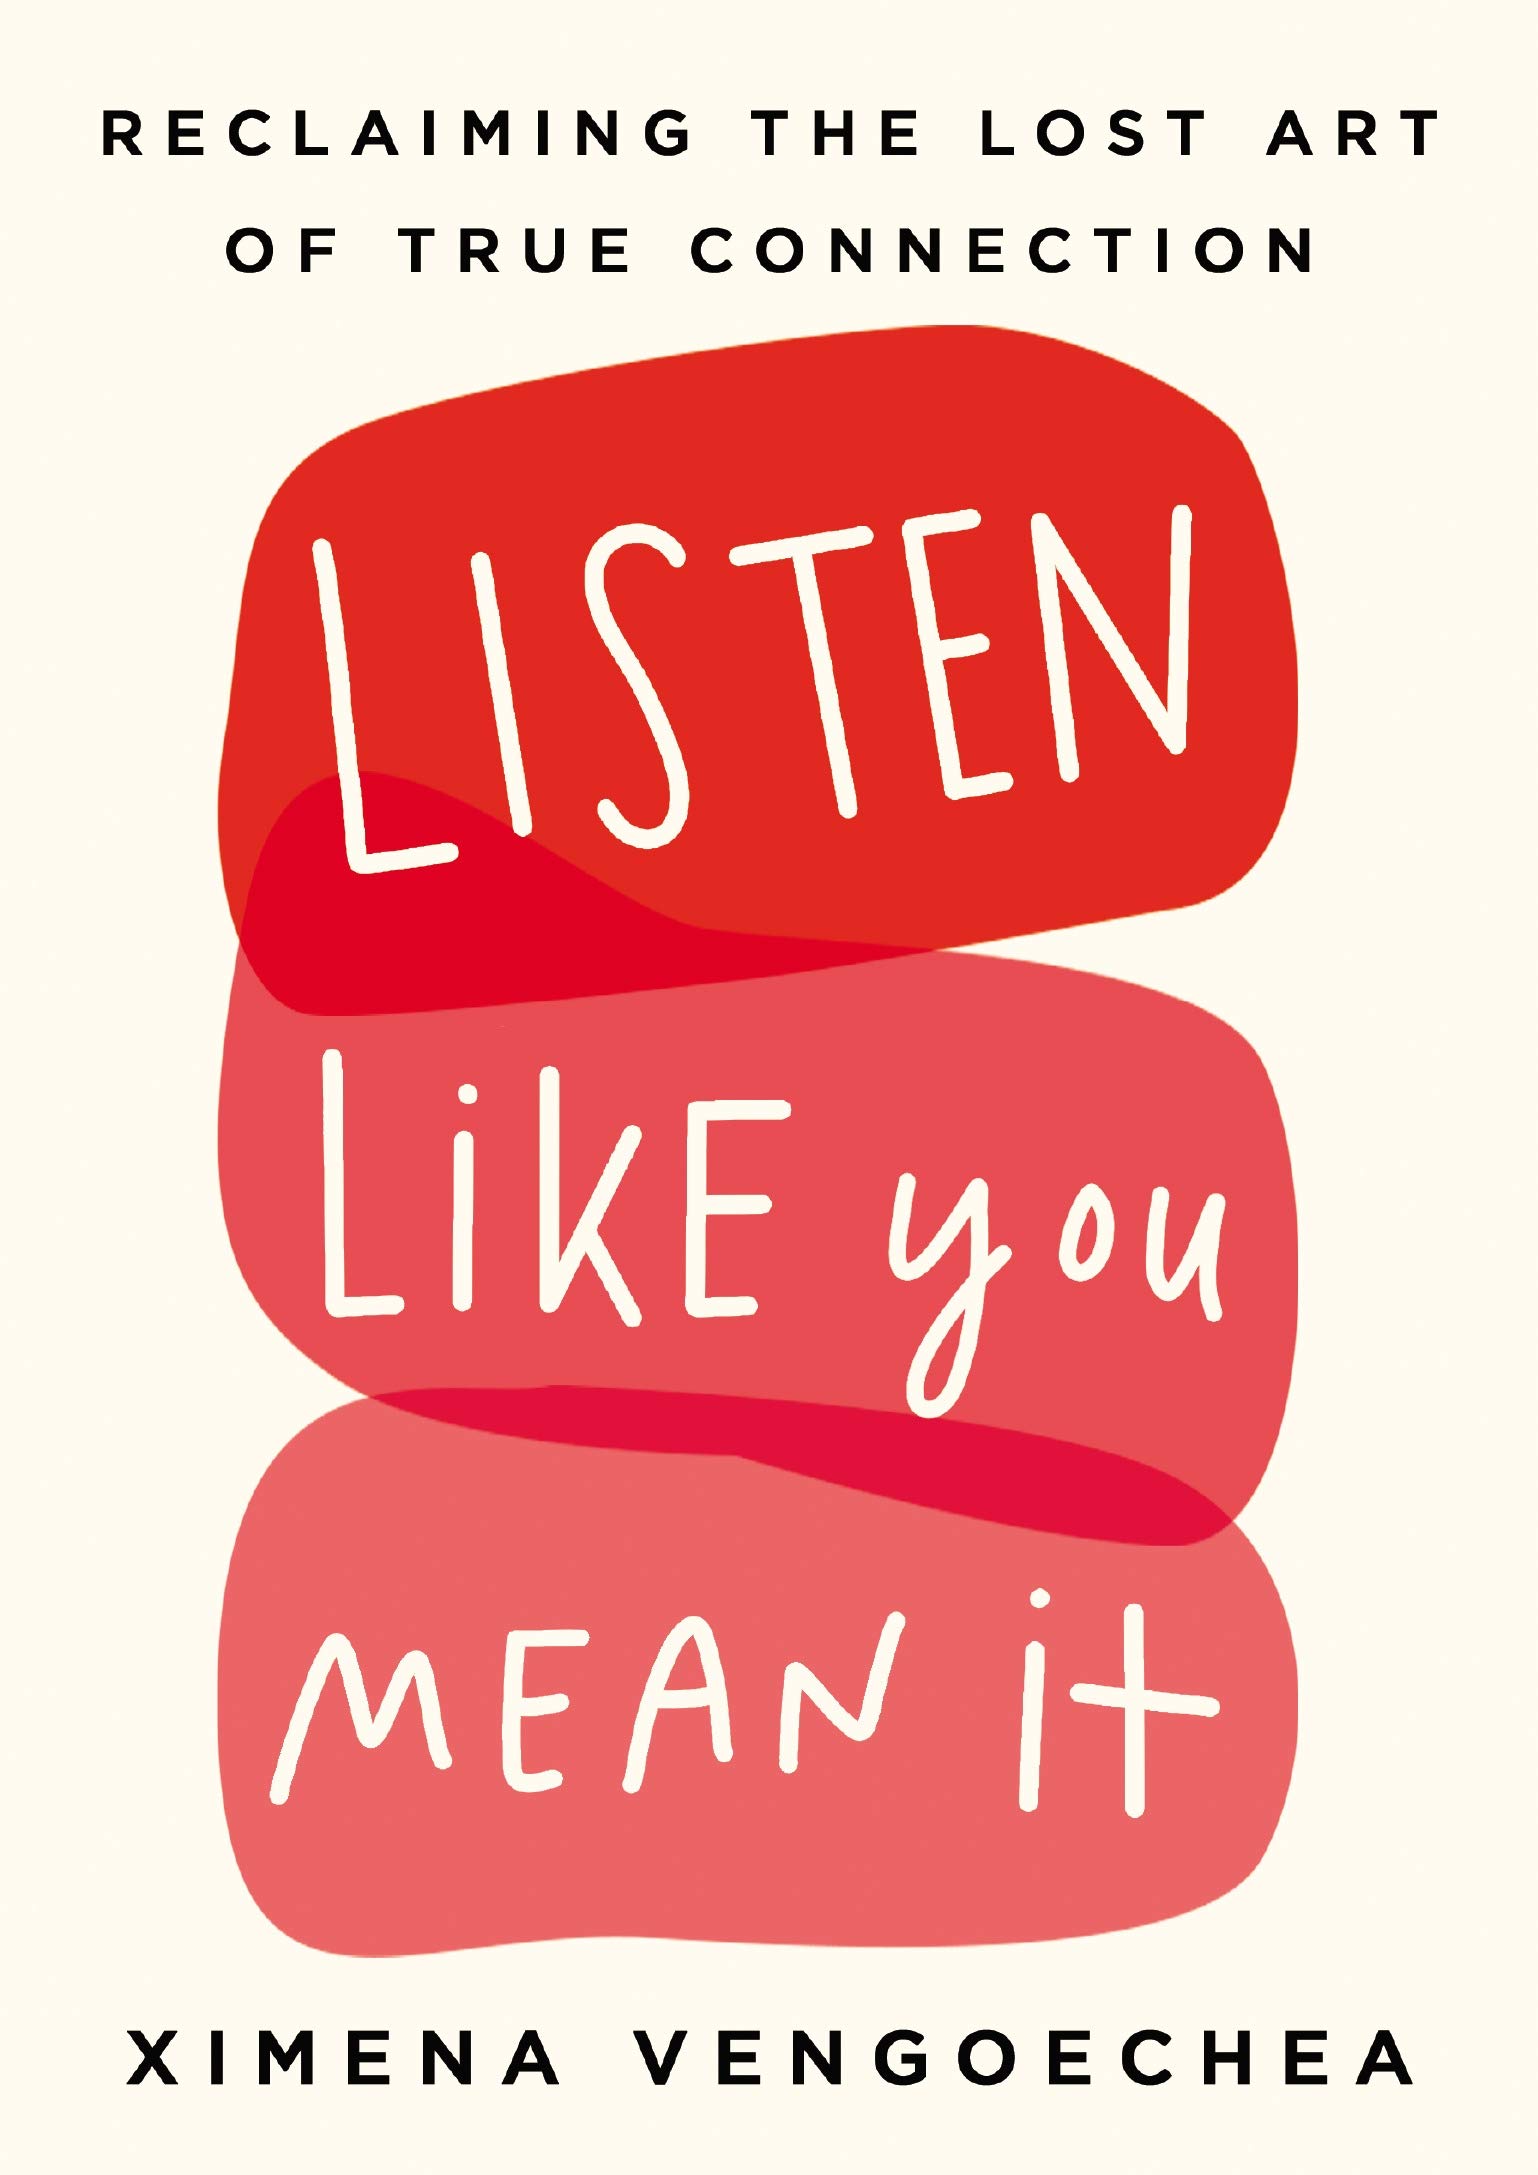 Book cover of Listen Like you mean it by Ximena Vengoechea